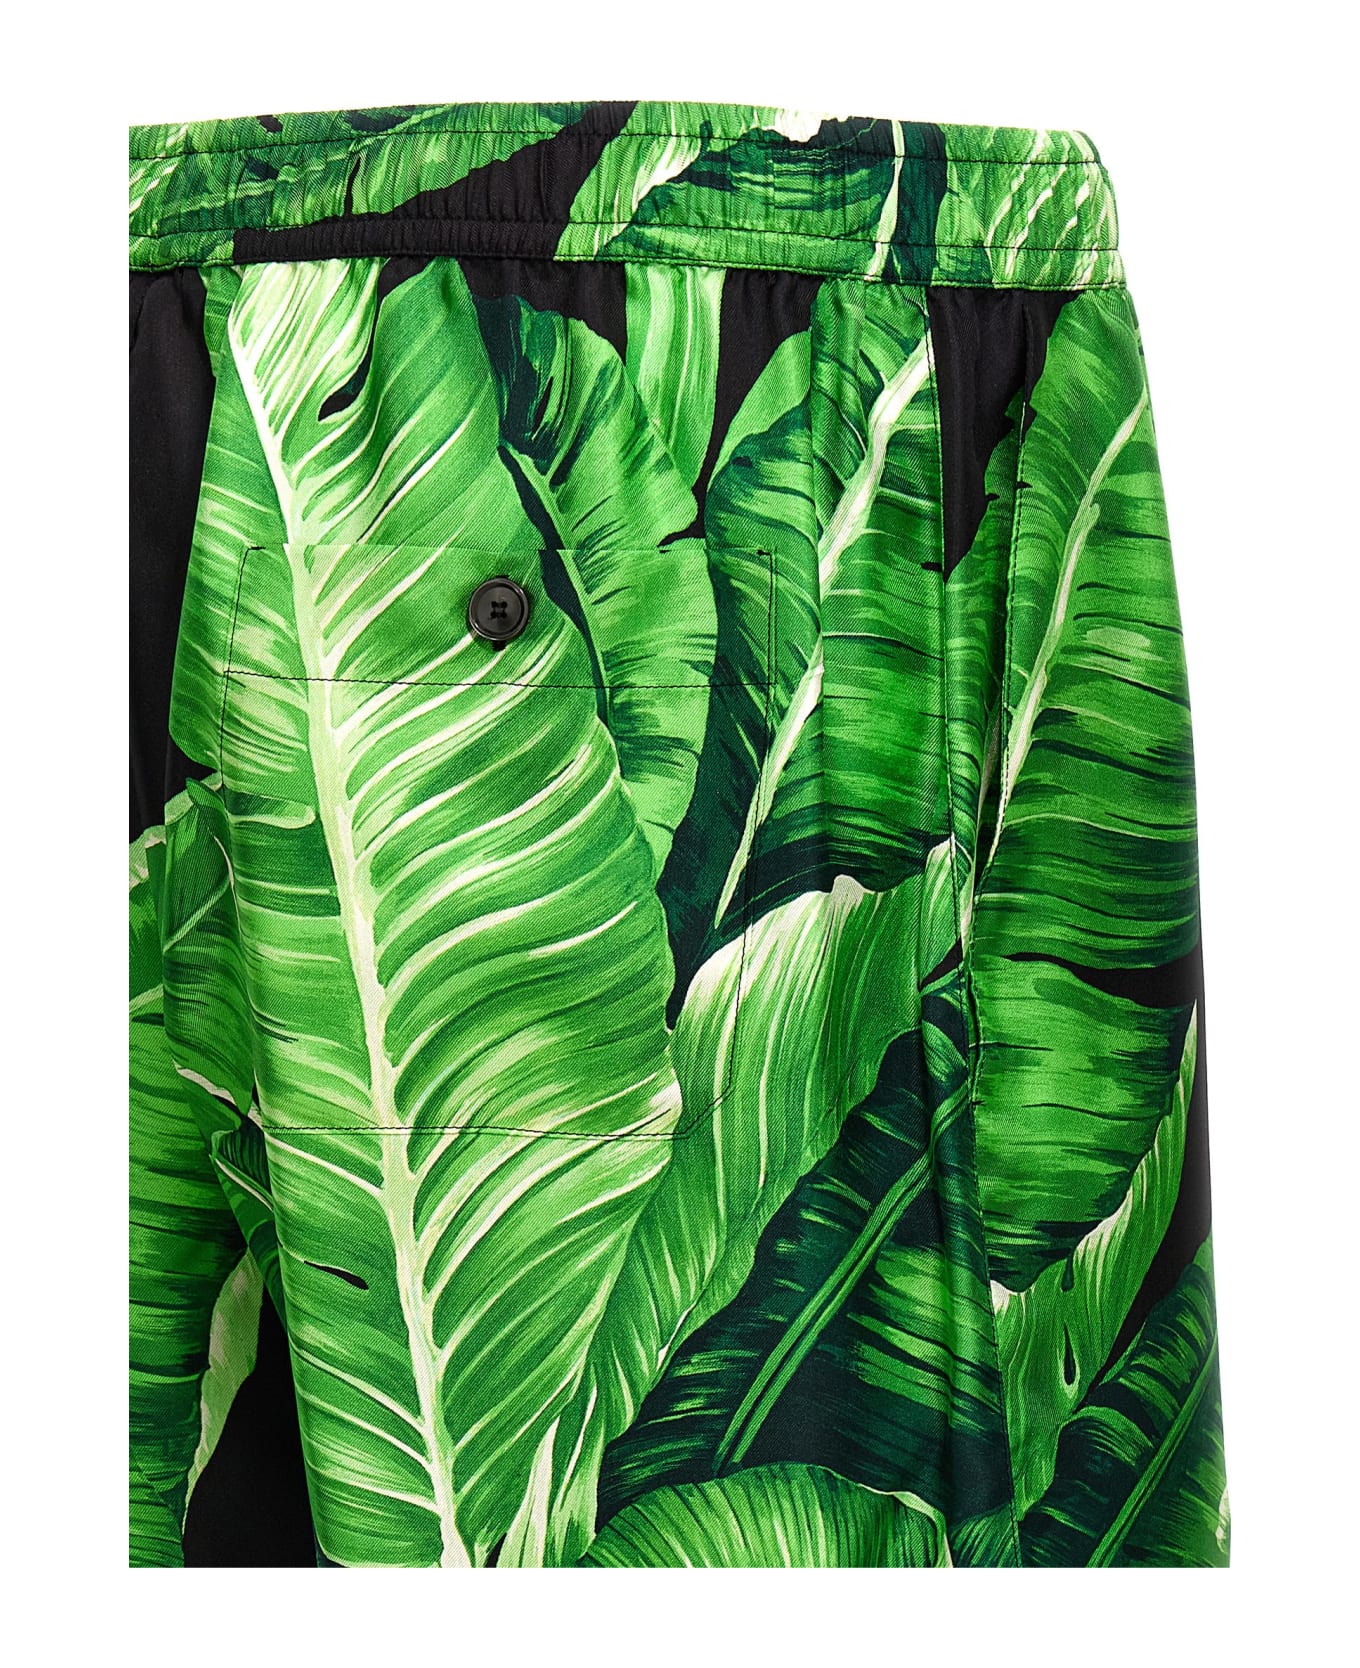 Dolce & Gabbana Bermuda Shorts With All-over Leaf Print - Green